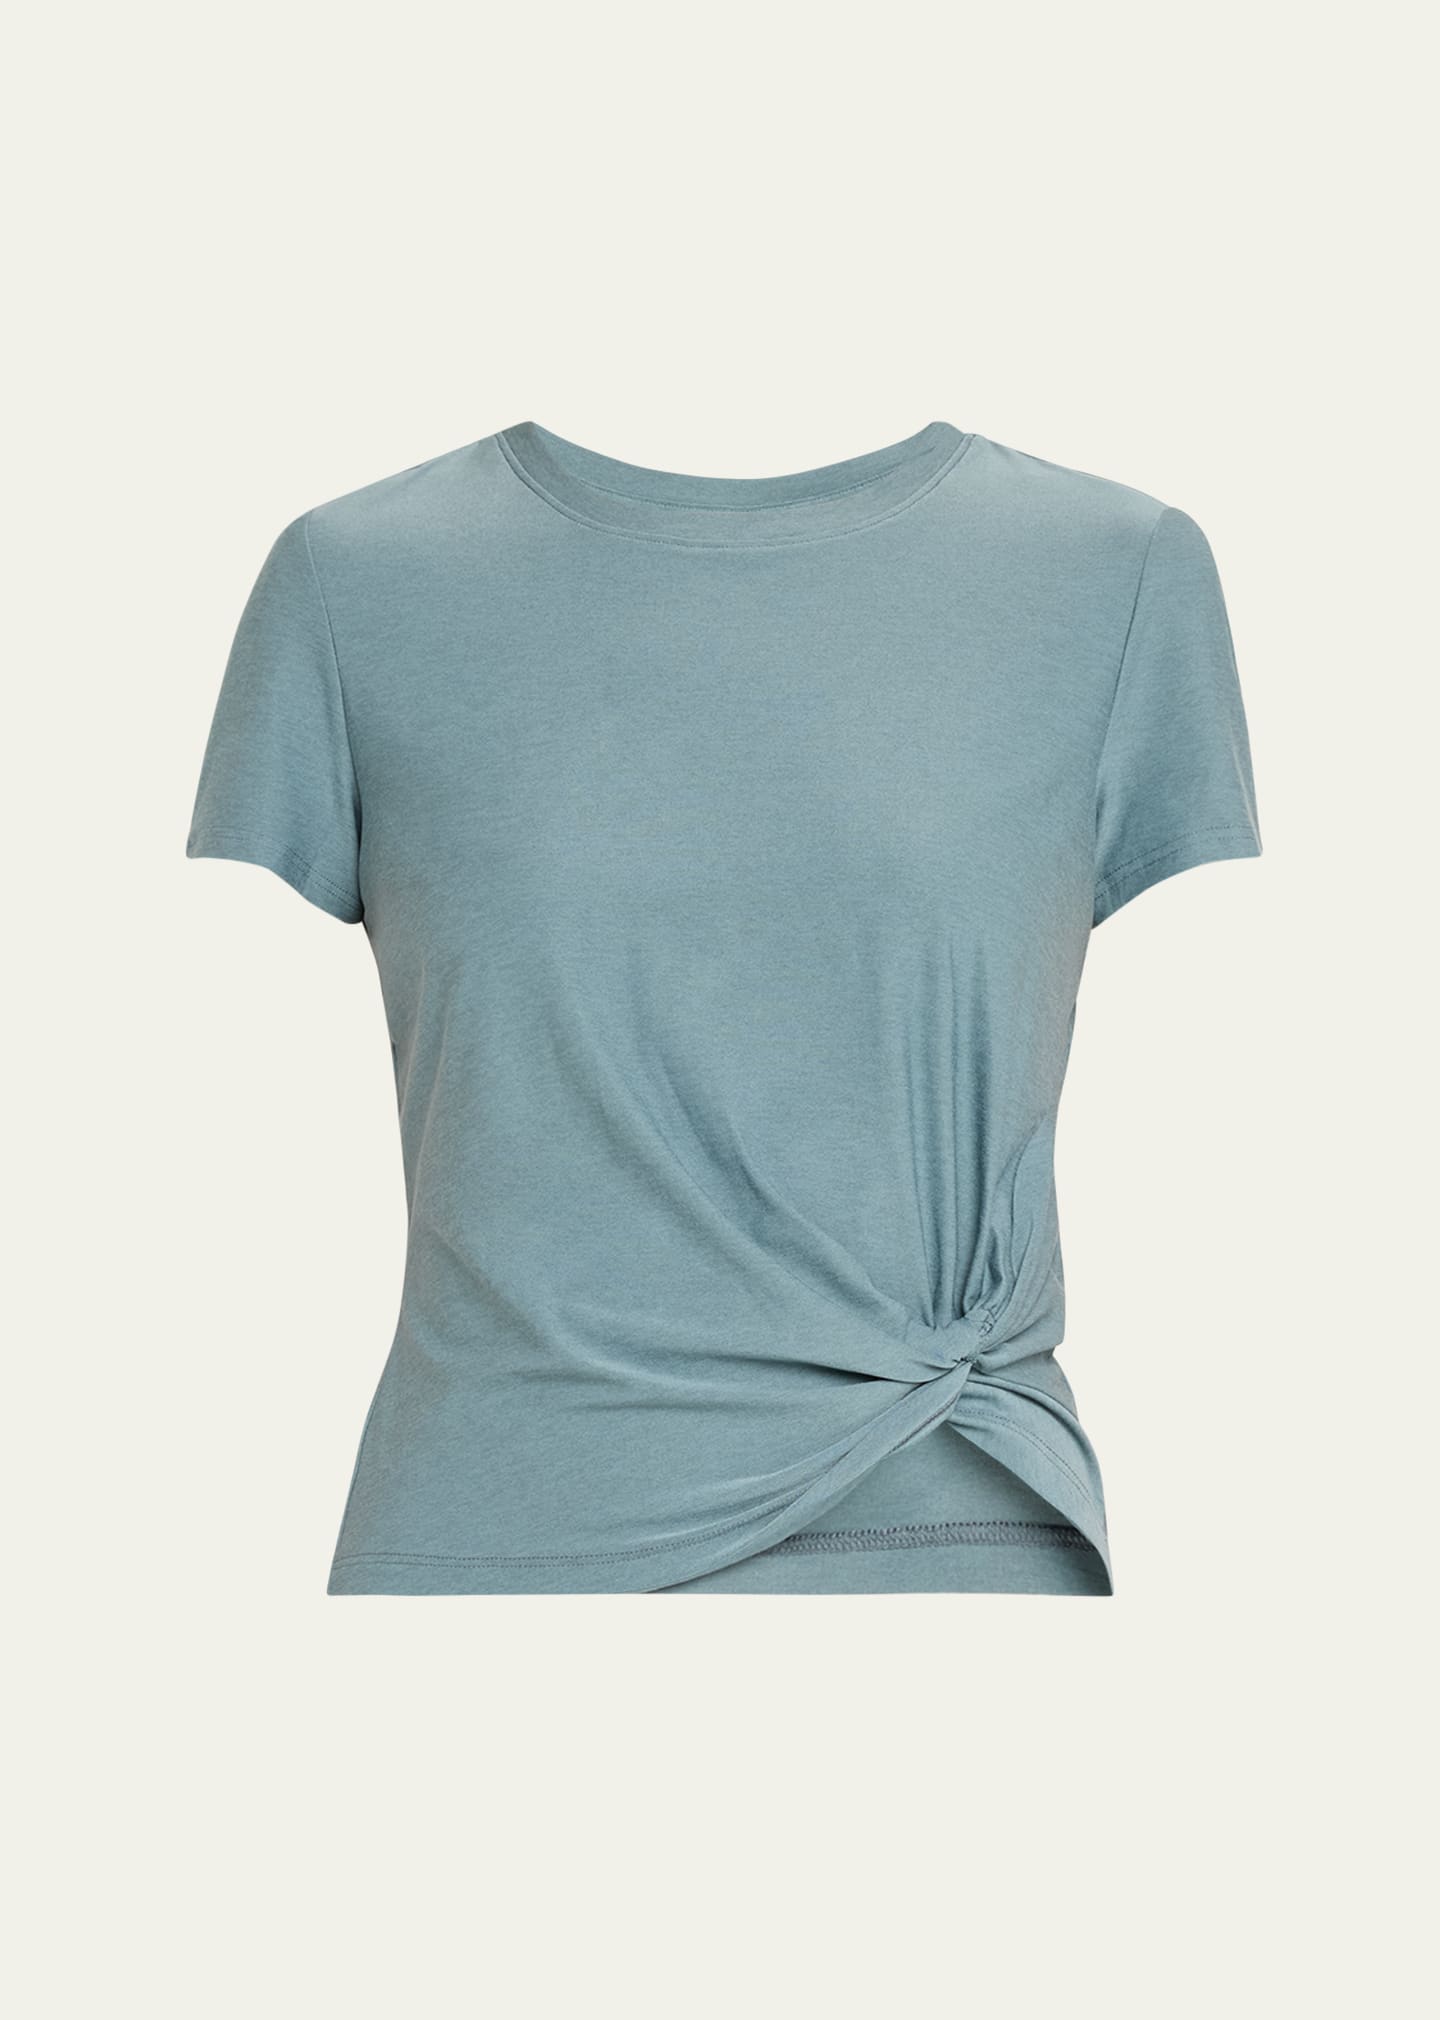 Featherweight For a Spin Tee